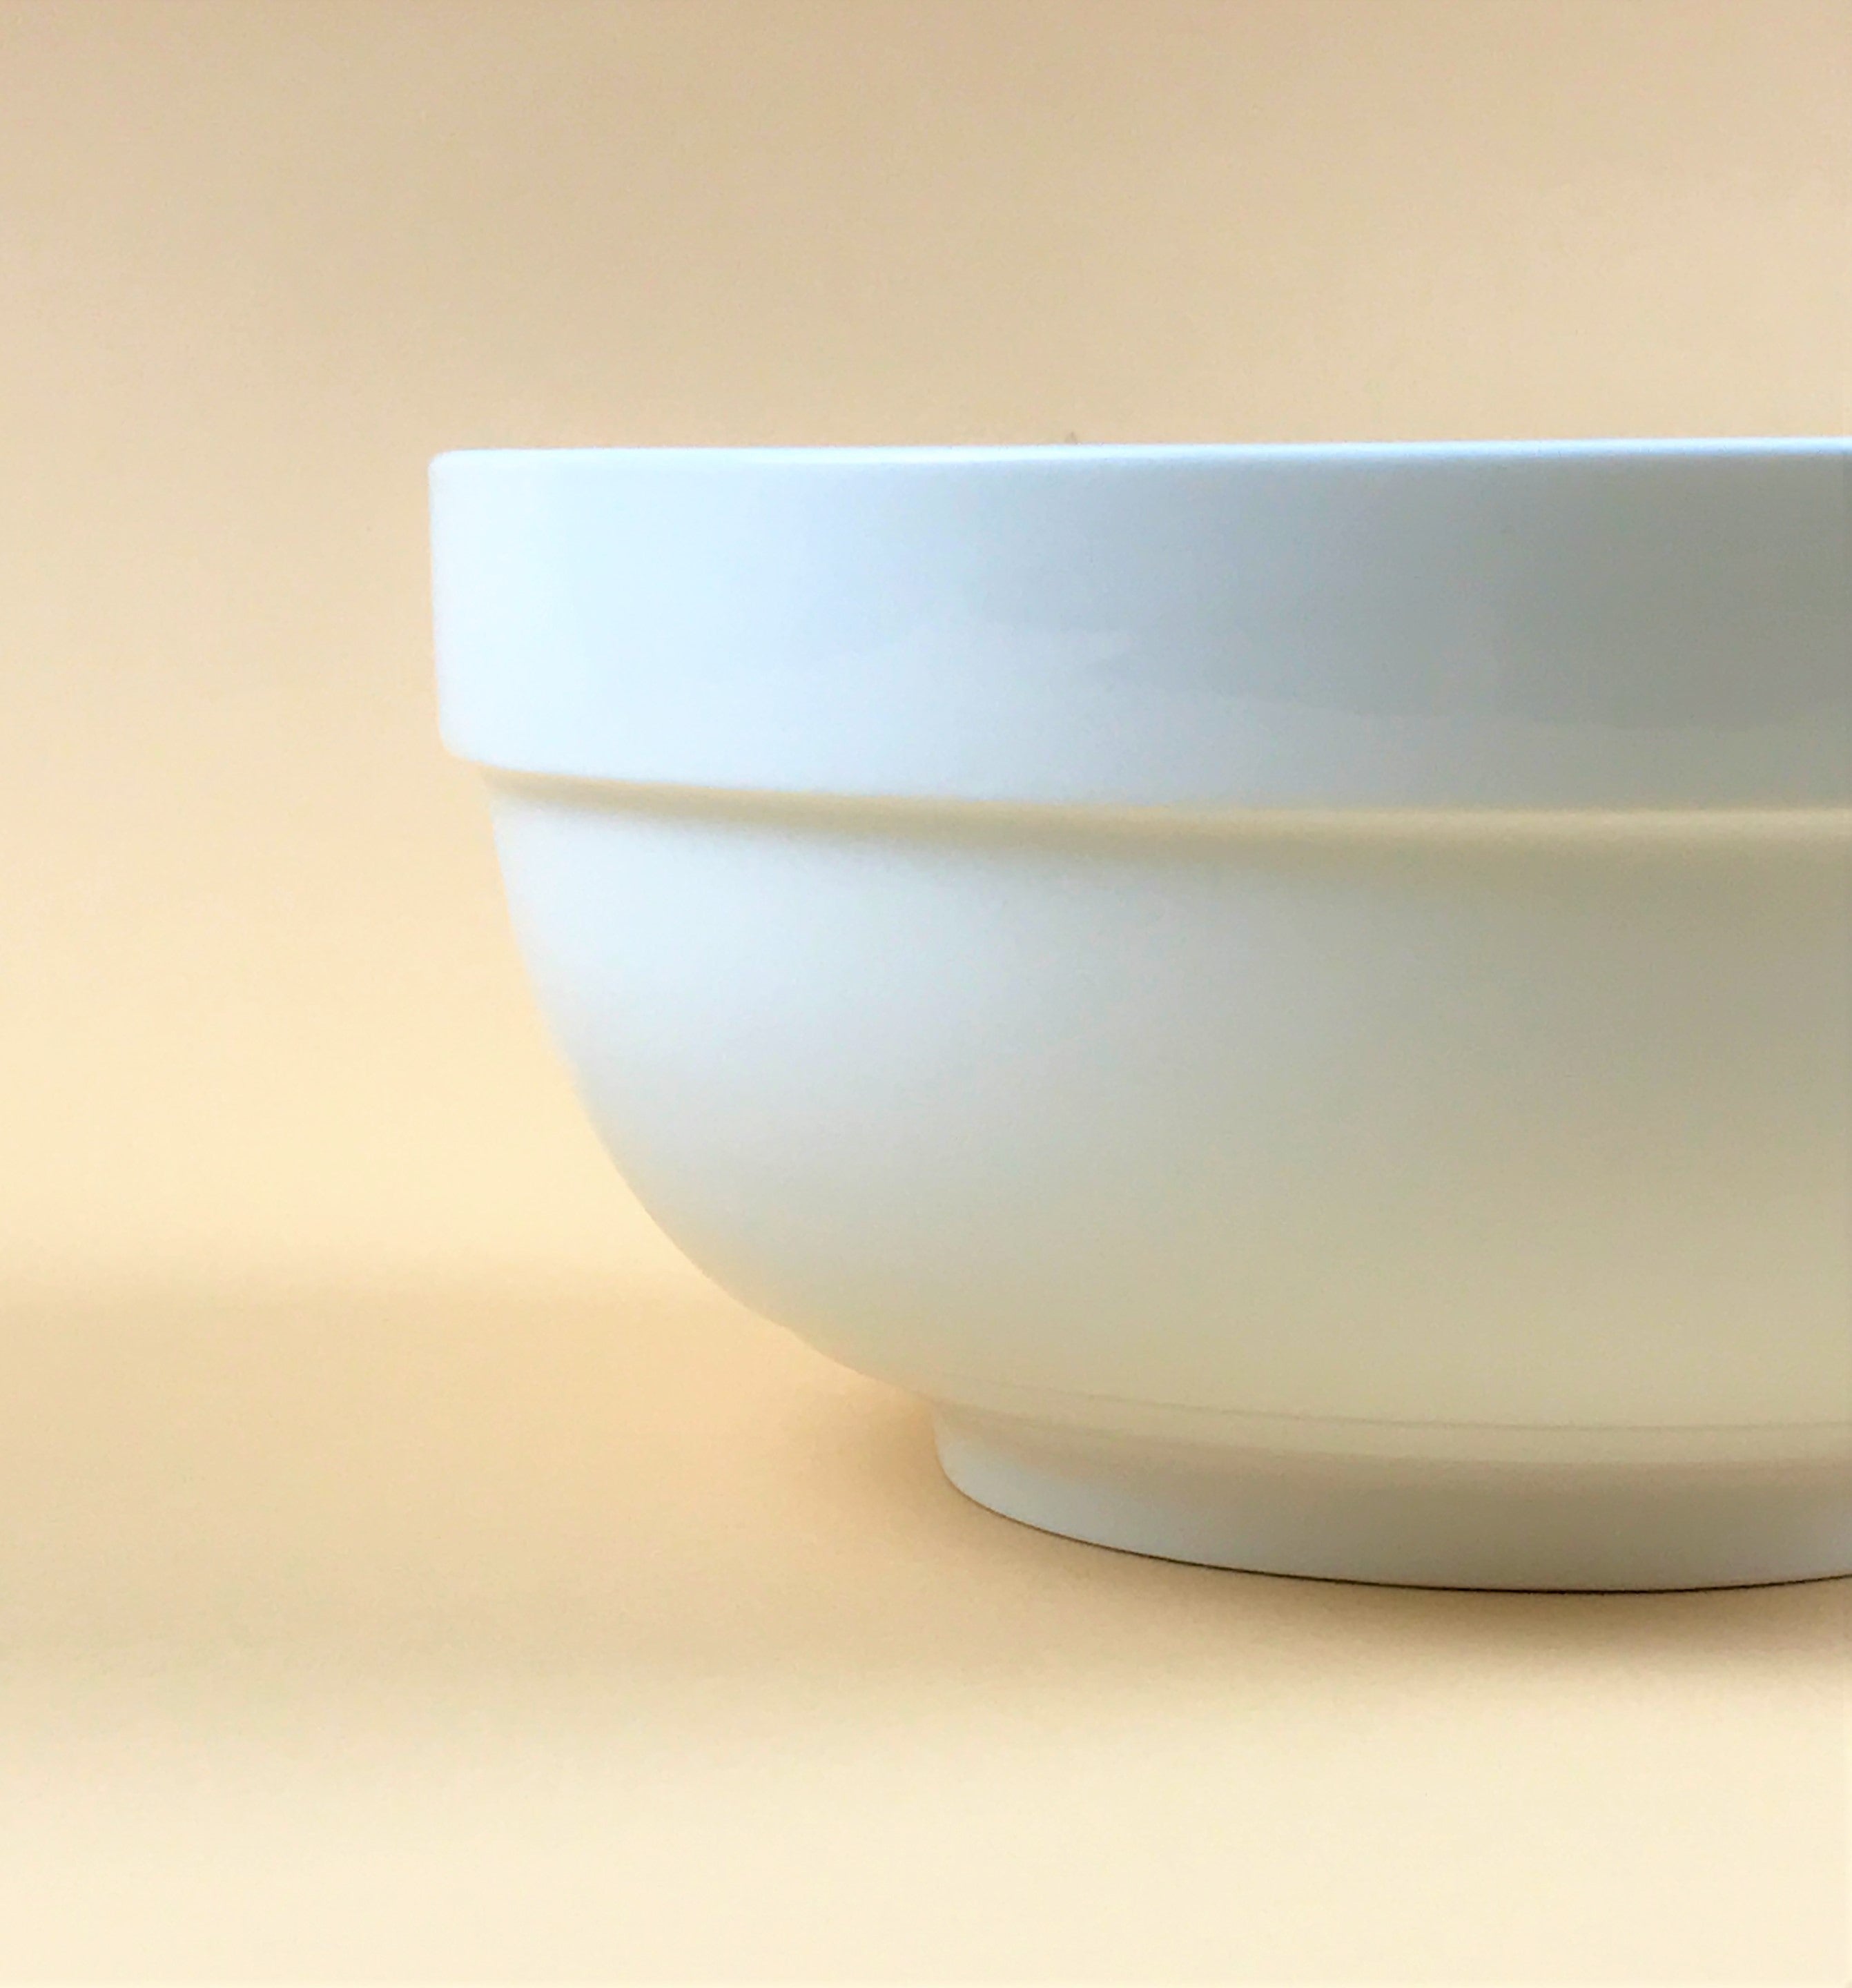 Henry Bowls in 3 sizes, 9 oz, 28 oz, and 44 oz